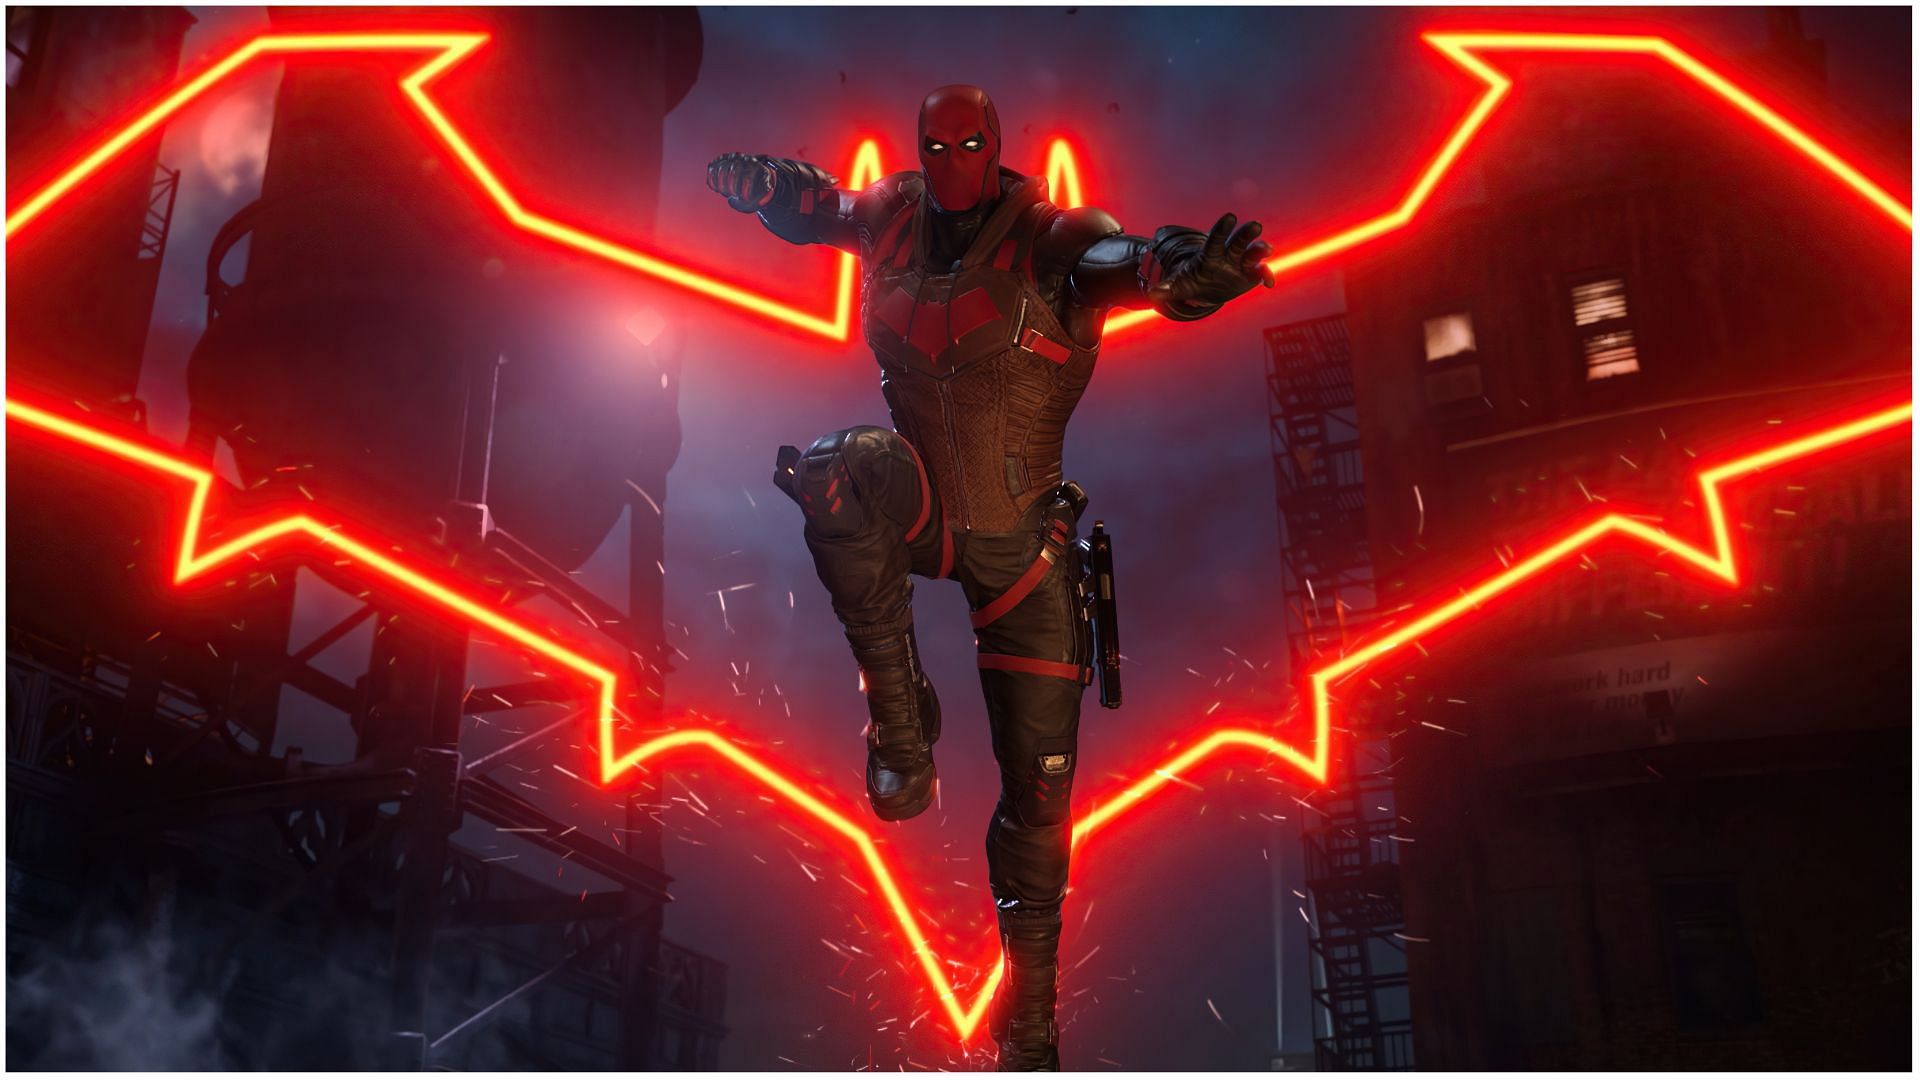 All Robin suits in Gotham Knights ranked